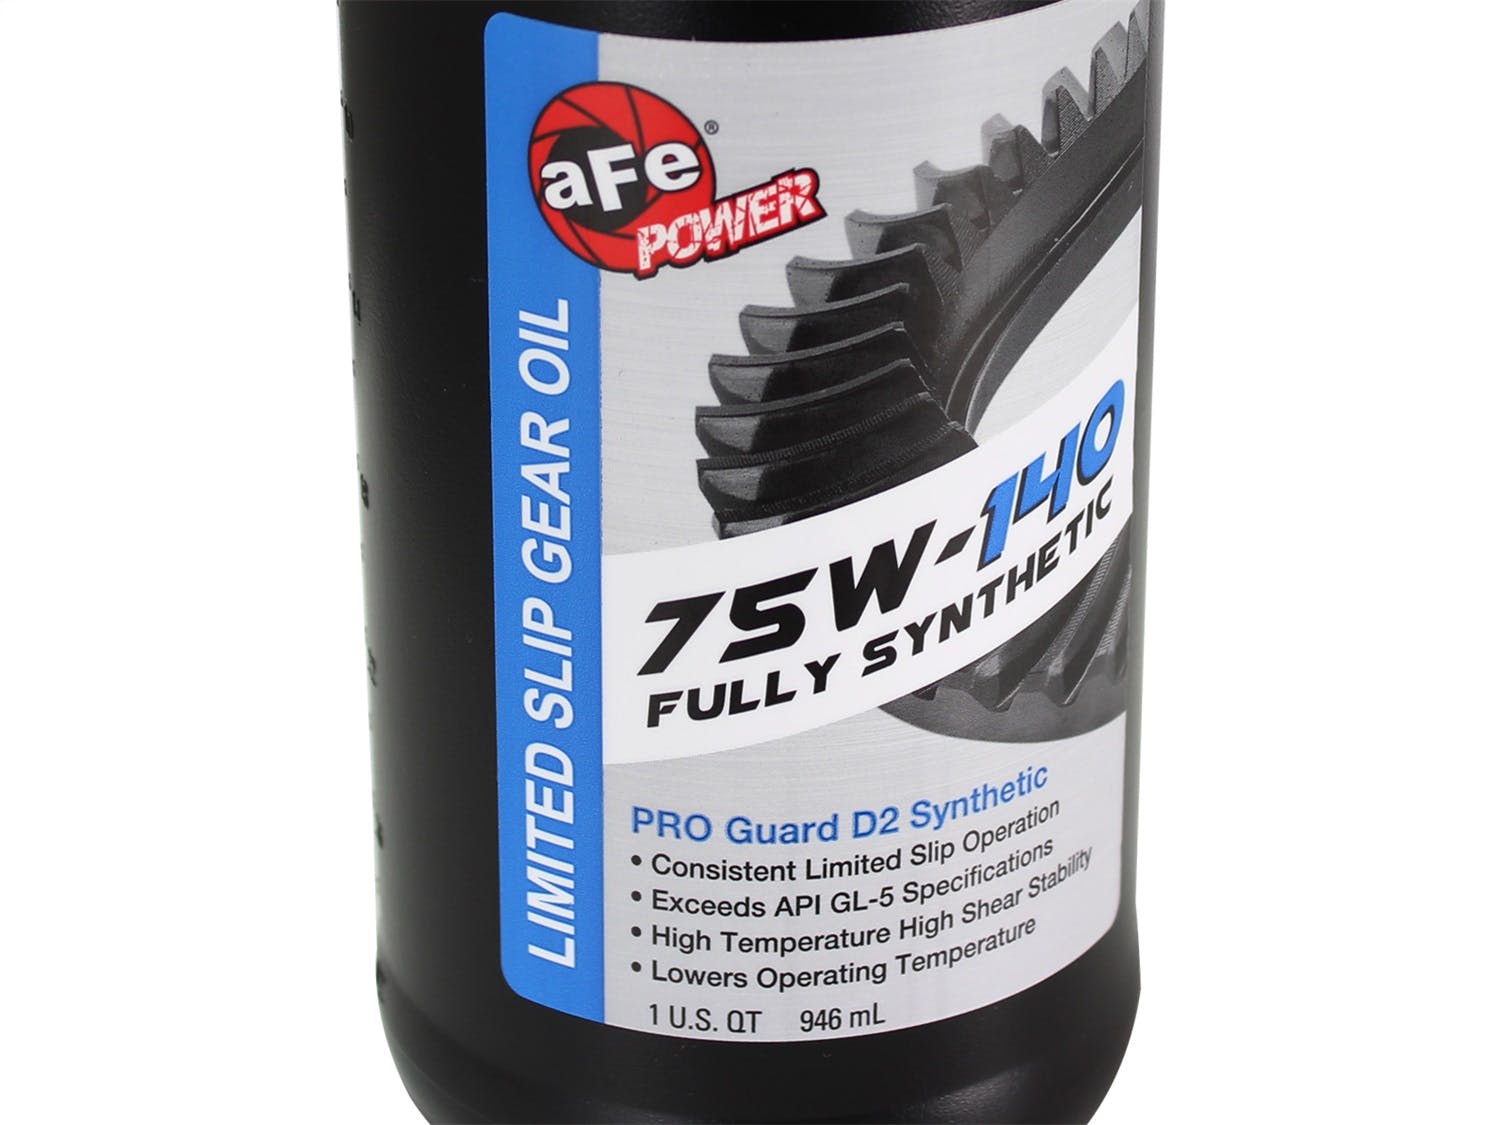 AFE 90-20101 aFe Power Chemicals Pro Guard D2 Synthetic